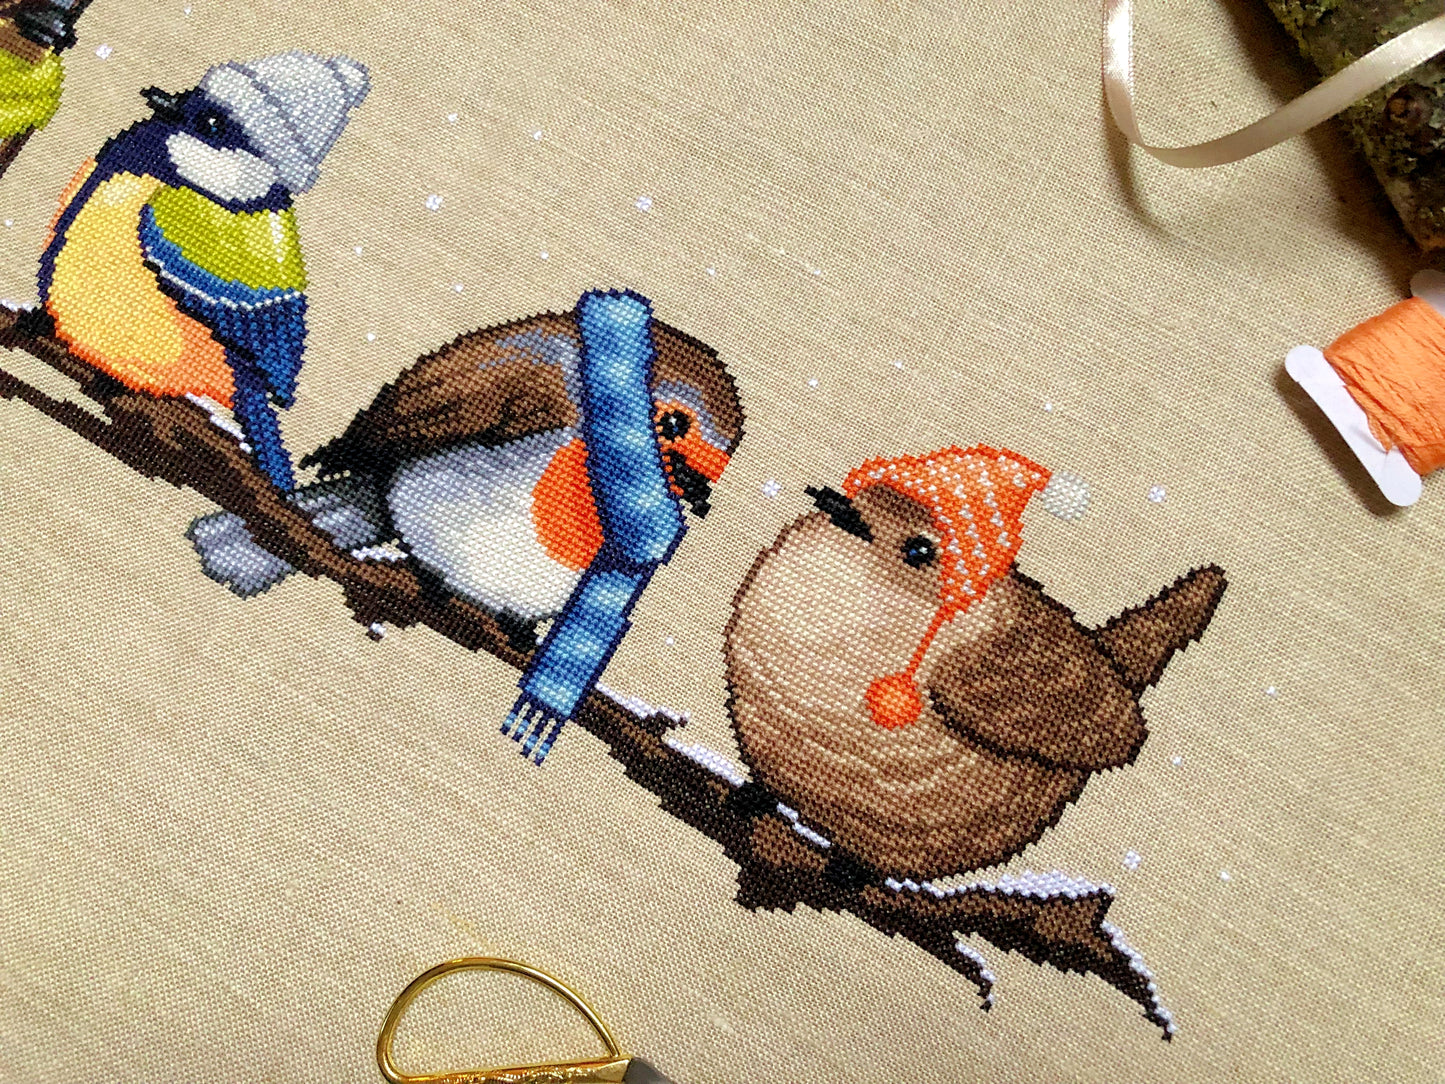 Closeup of Winter Birds cross stitch pattern. Two of the four birds are depicted, these are the robin and wren. Colors are yellow, brown, orange, blue, green and white. Robin is wearing a scarf and the wren is wearing a hat with dangly pompoms.